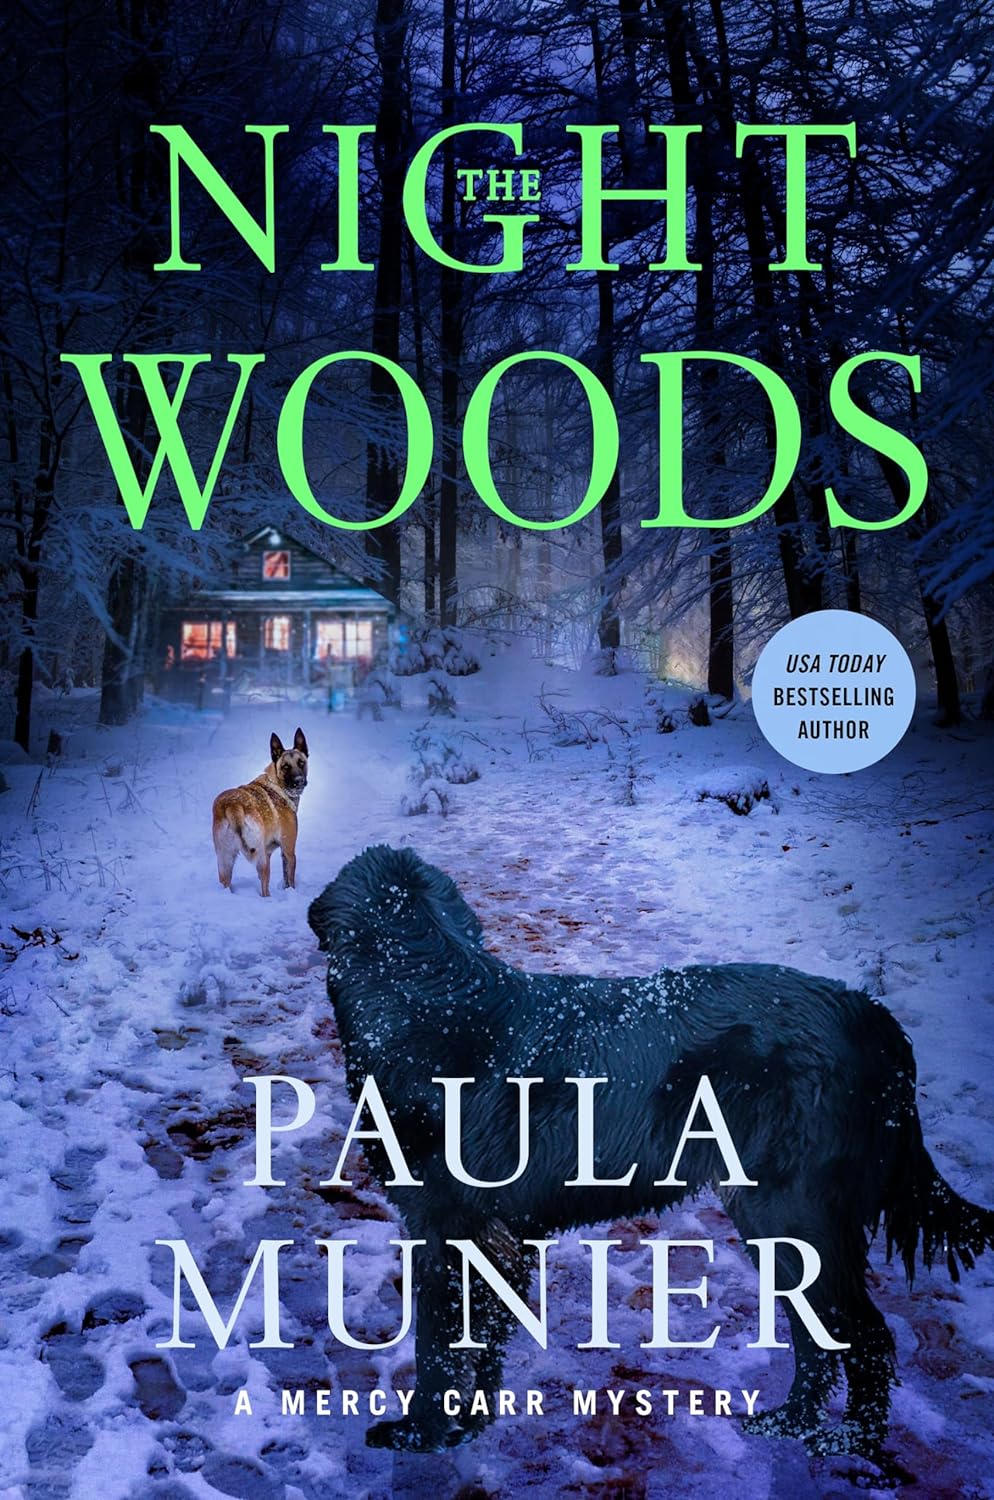 Book cover for "The Night Woods" by Paula Munier. A snowy nighttime forest scene with bare trees silhouetted against a dark blue sky. In the foreground, a snow-covered path leads to a distant log cabin with warm, glowing windows. Two dogs stand on the path - a German Shepherd in the middle distance and a large, shaggy black dog closer to the viewer. The book title "The Night Woods" is displayed in large, bright green text at the top of the cover. The author's name "Paula Munier" appears in white text at the bottom. A blue circular badge in the lower right corner indicates "USA Today Bestselling Author". The cover suggests a winter mystery or thriller set in a remote, wooded location